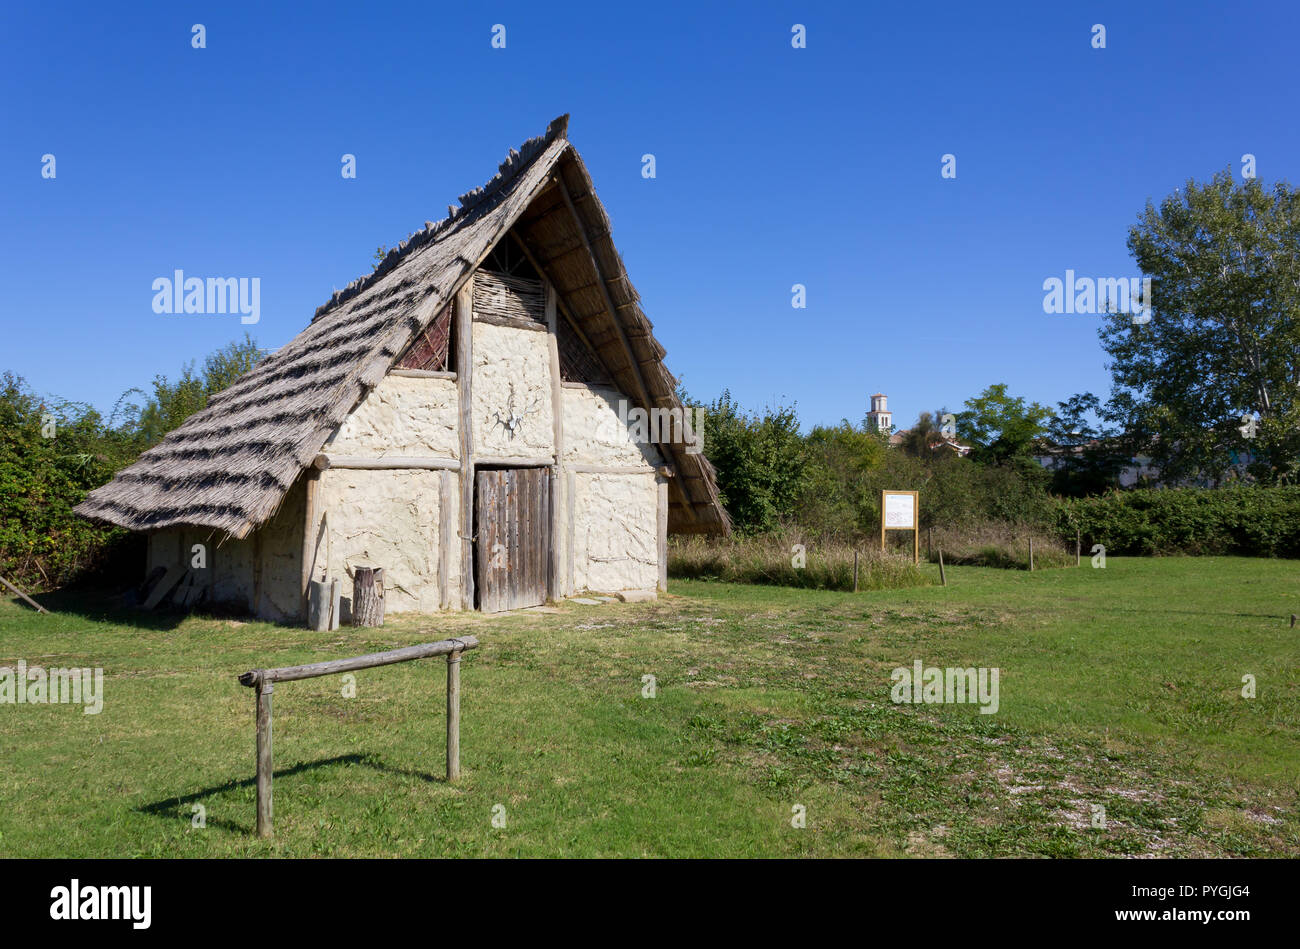 Reconstruction of a neolithic house in Marano Lagunare, Italy Stock Photo